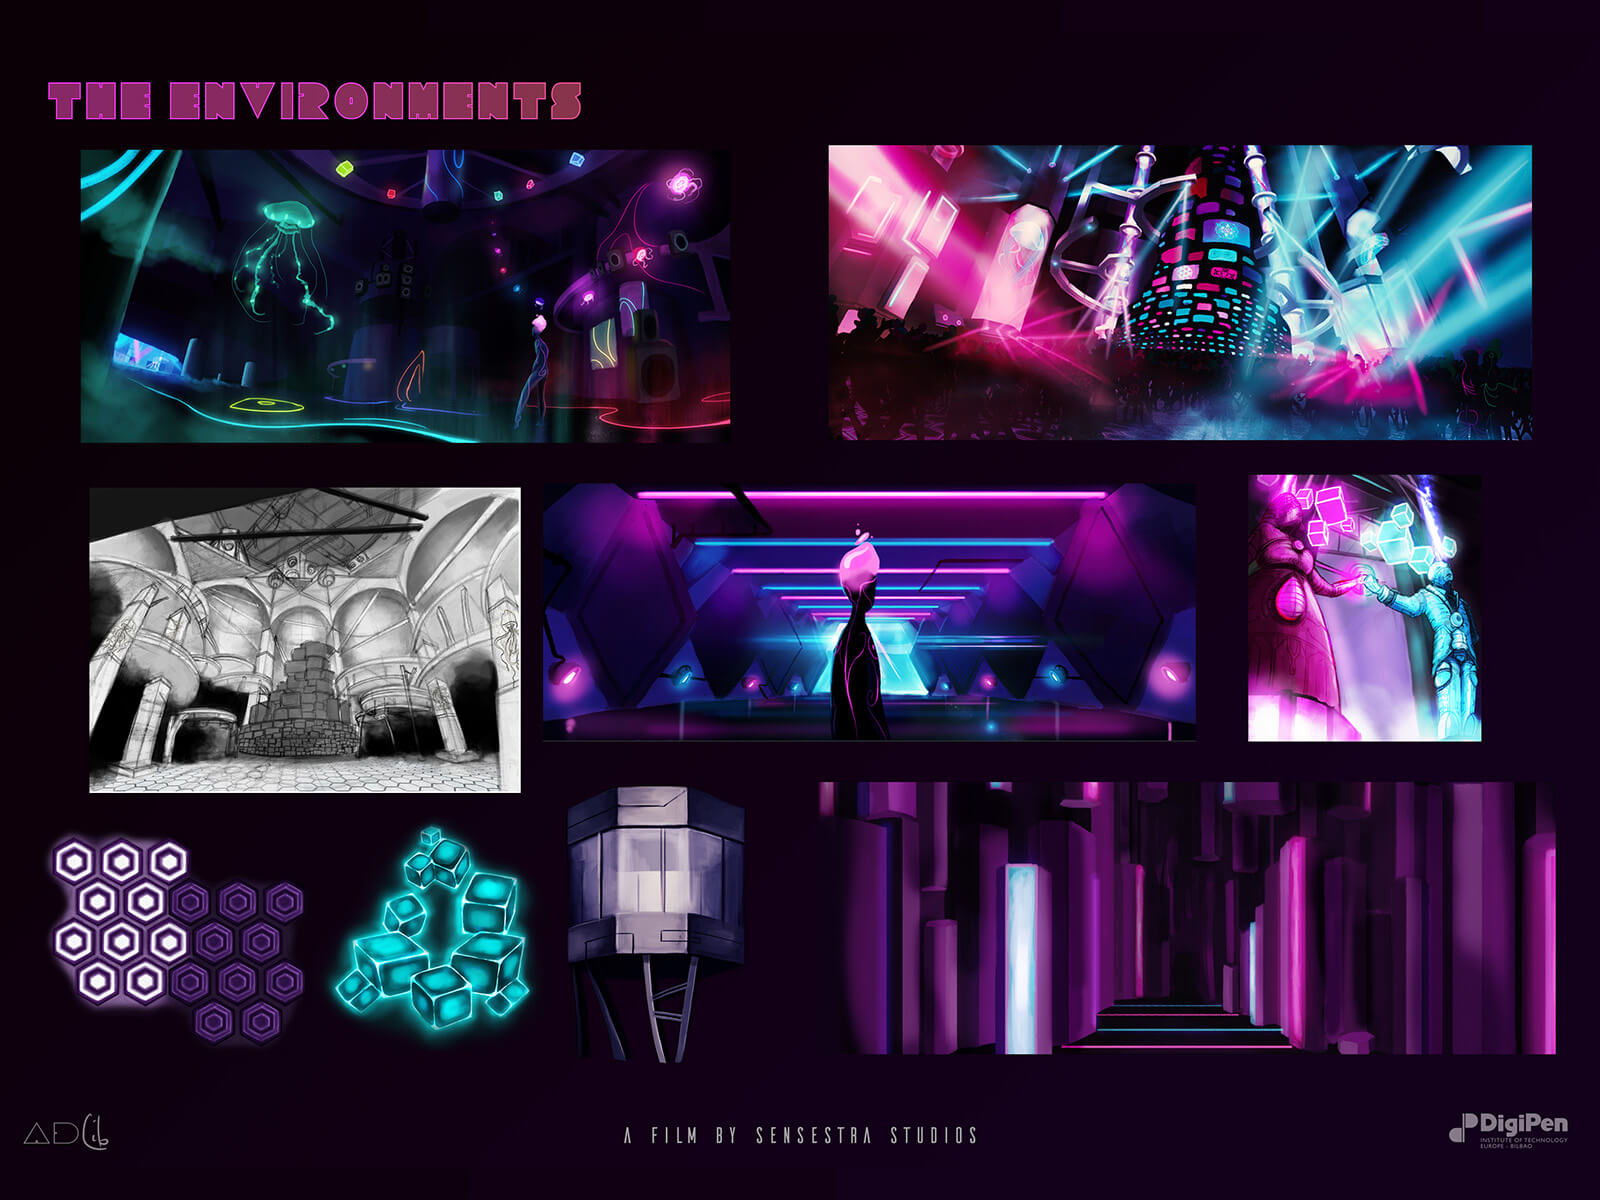 Concept drawings and paintings of futuristic nightclub environment